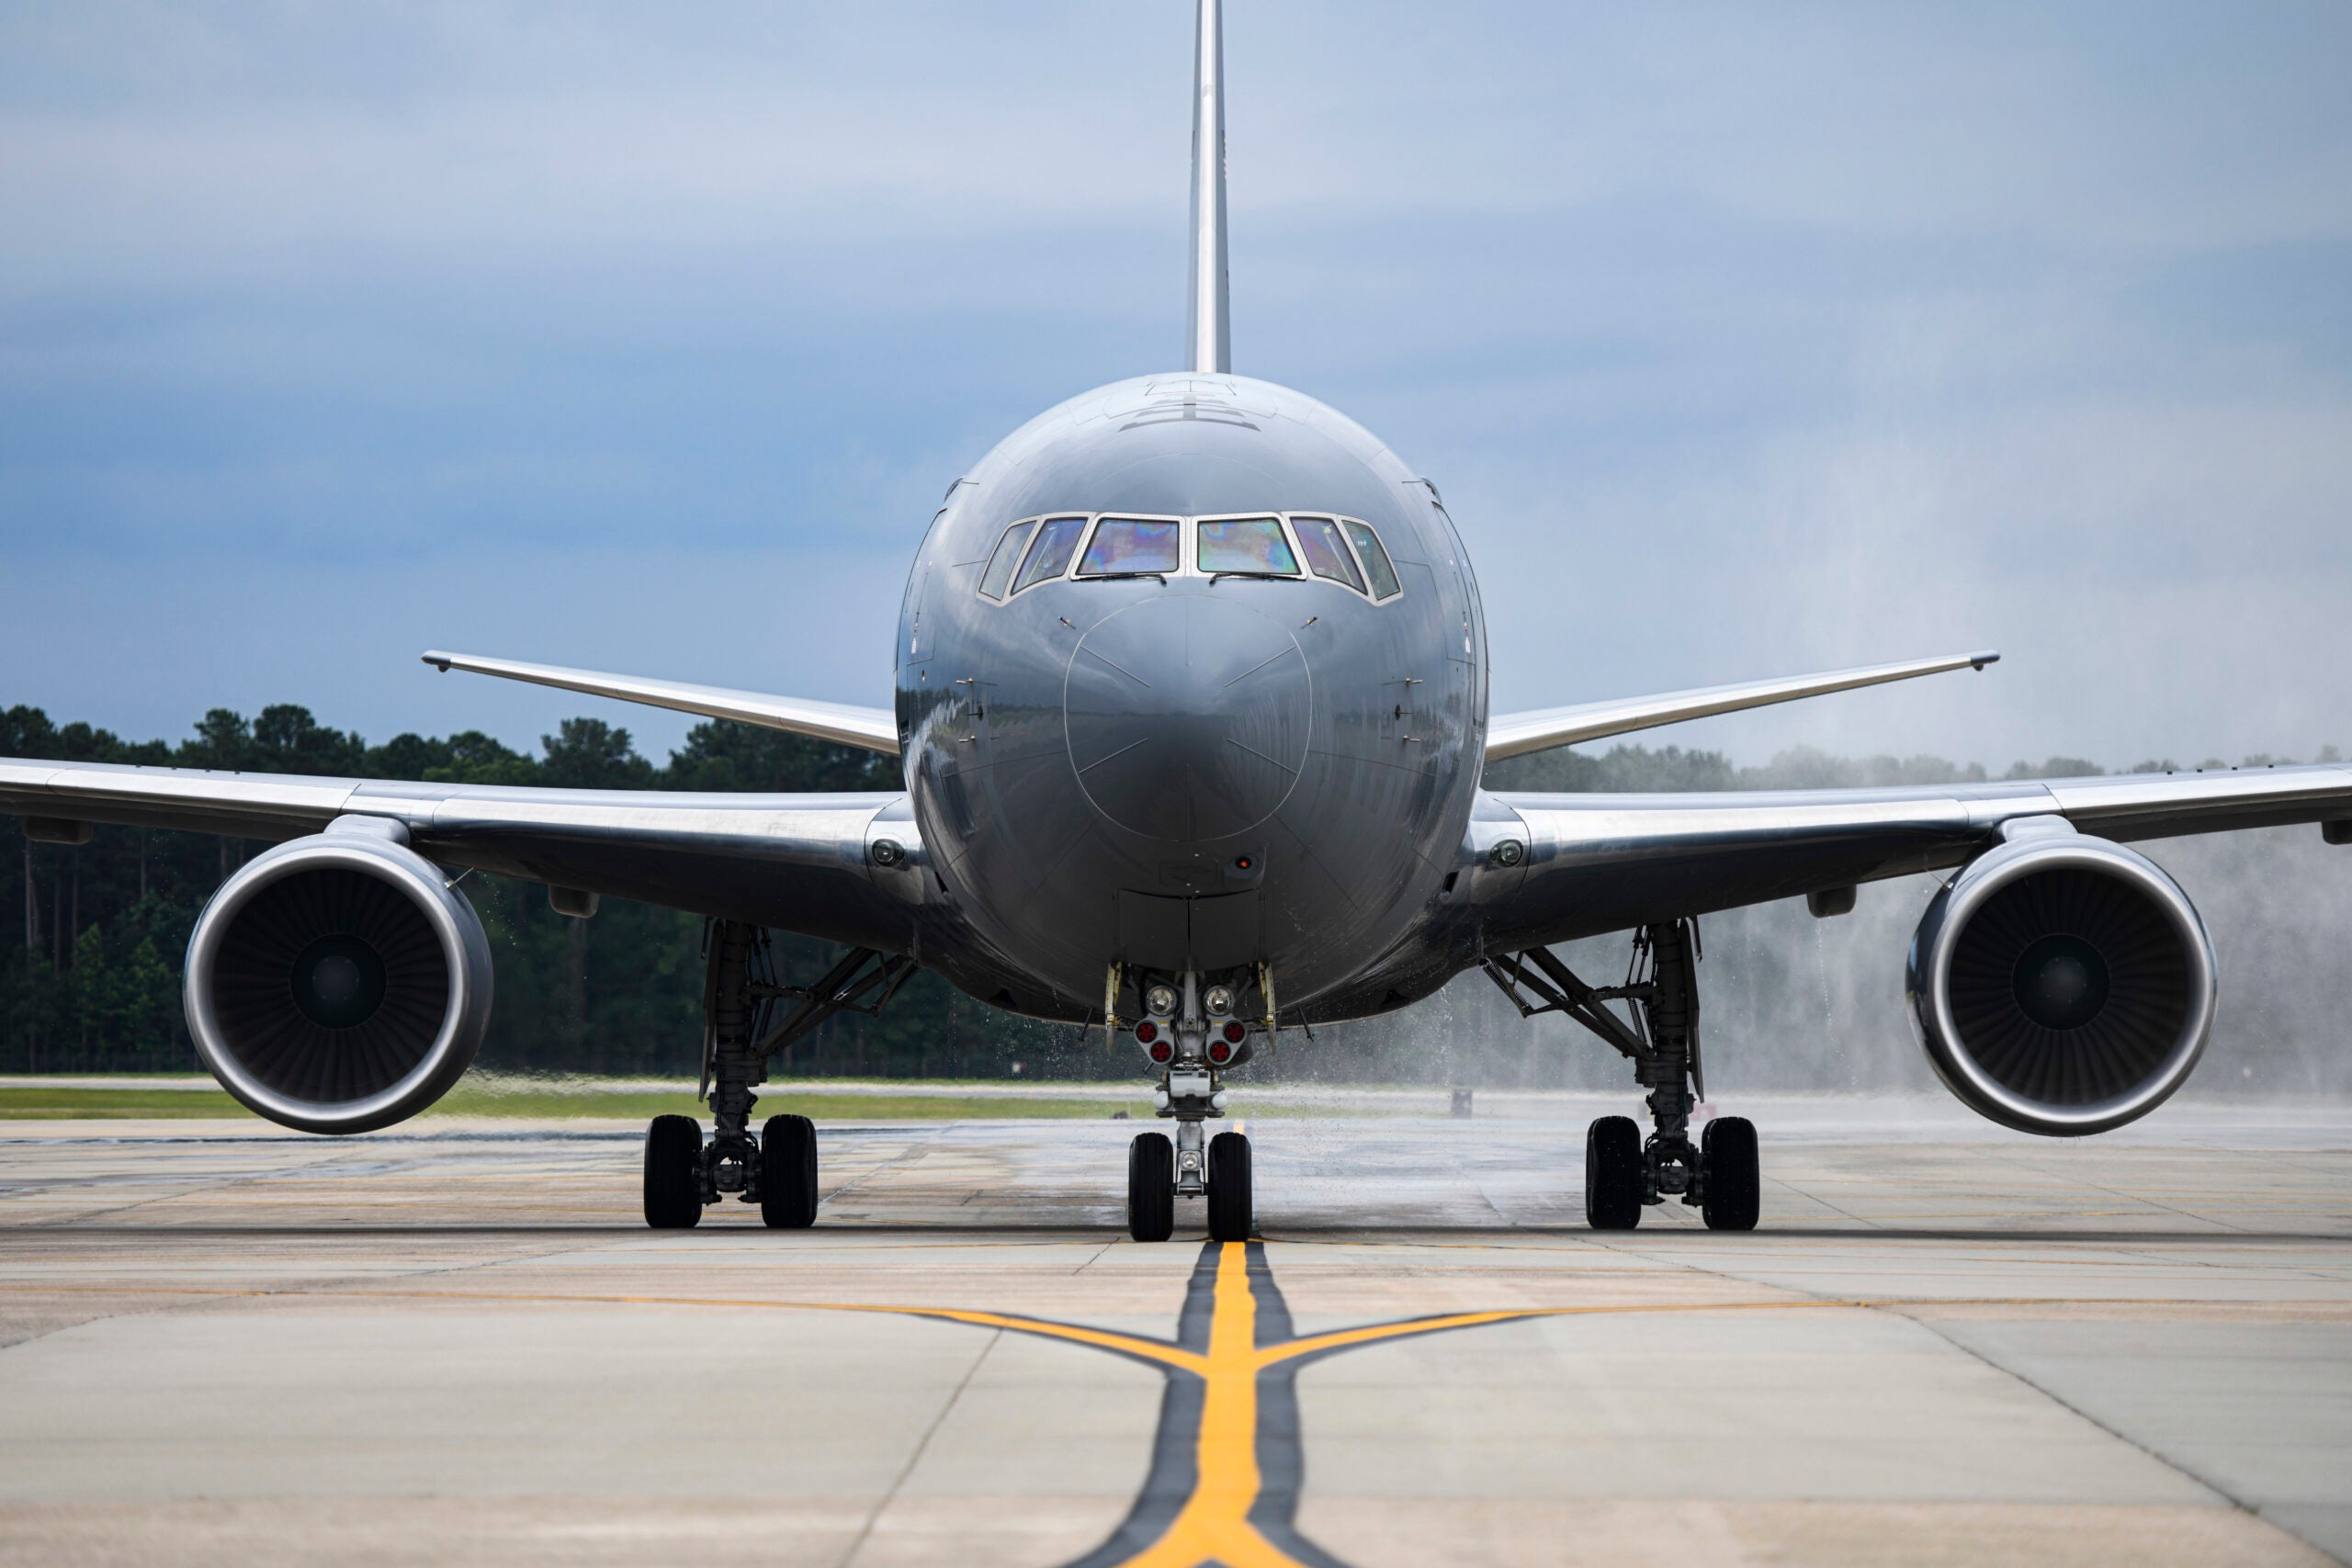 The first KC-46A Pegasus lands at Seymour Johnson Air Force Base, North Carolina, June 12, 2020. The KC-46A Pegasus is a widebody, multirole tanker that can refuel all U.S., allied and coalition military aircraft compatible with international aerial refueling procedures. (U.S. Air Force photo by Senior Airman Jacob B. Derry)